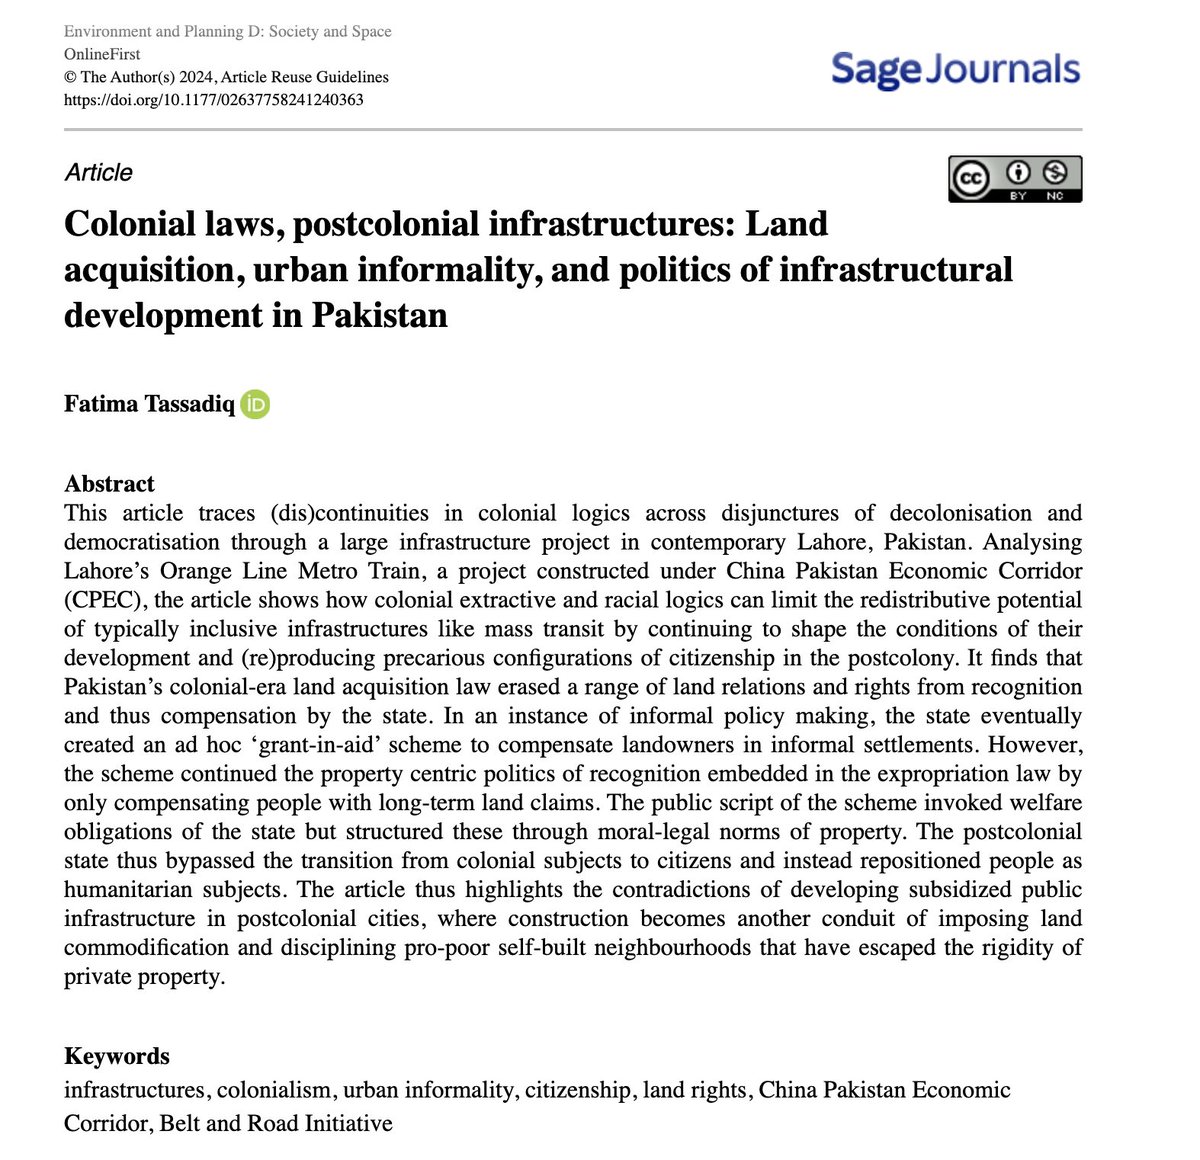 New OA paper by our @fatimatassadiq 'Colonial laws, postcolonial infrastructures: Land acquisition, urban informality, and politics of infrastructural development in Pakistan' in EPD @SocietyandSpace. Read here: journals.sagepub.com/doi/10.1177/02…